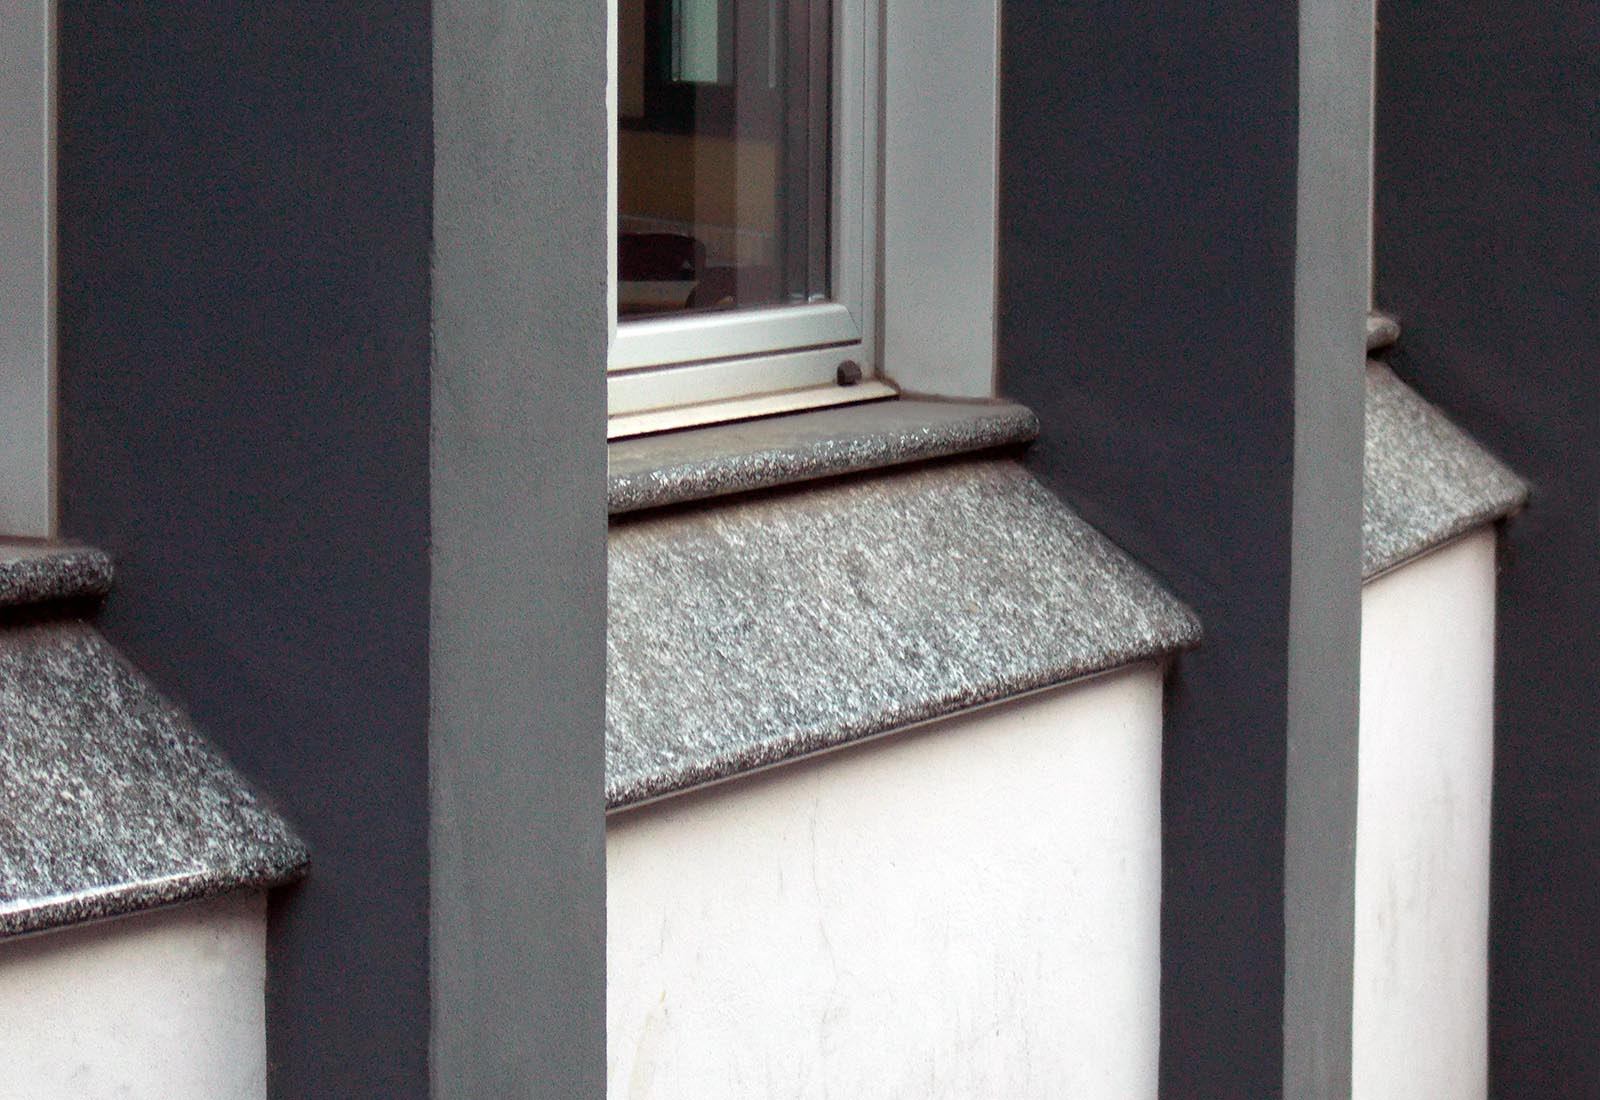 Manzoni school center in Milan - Detail of the new sills